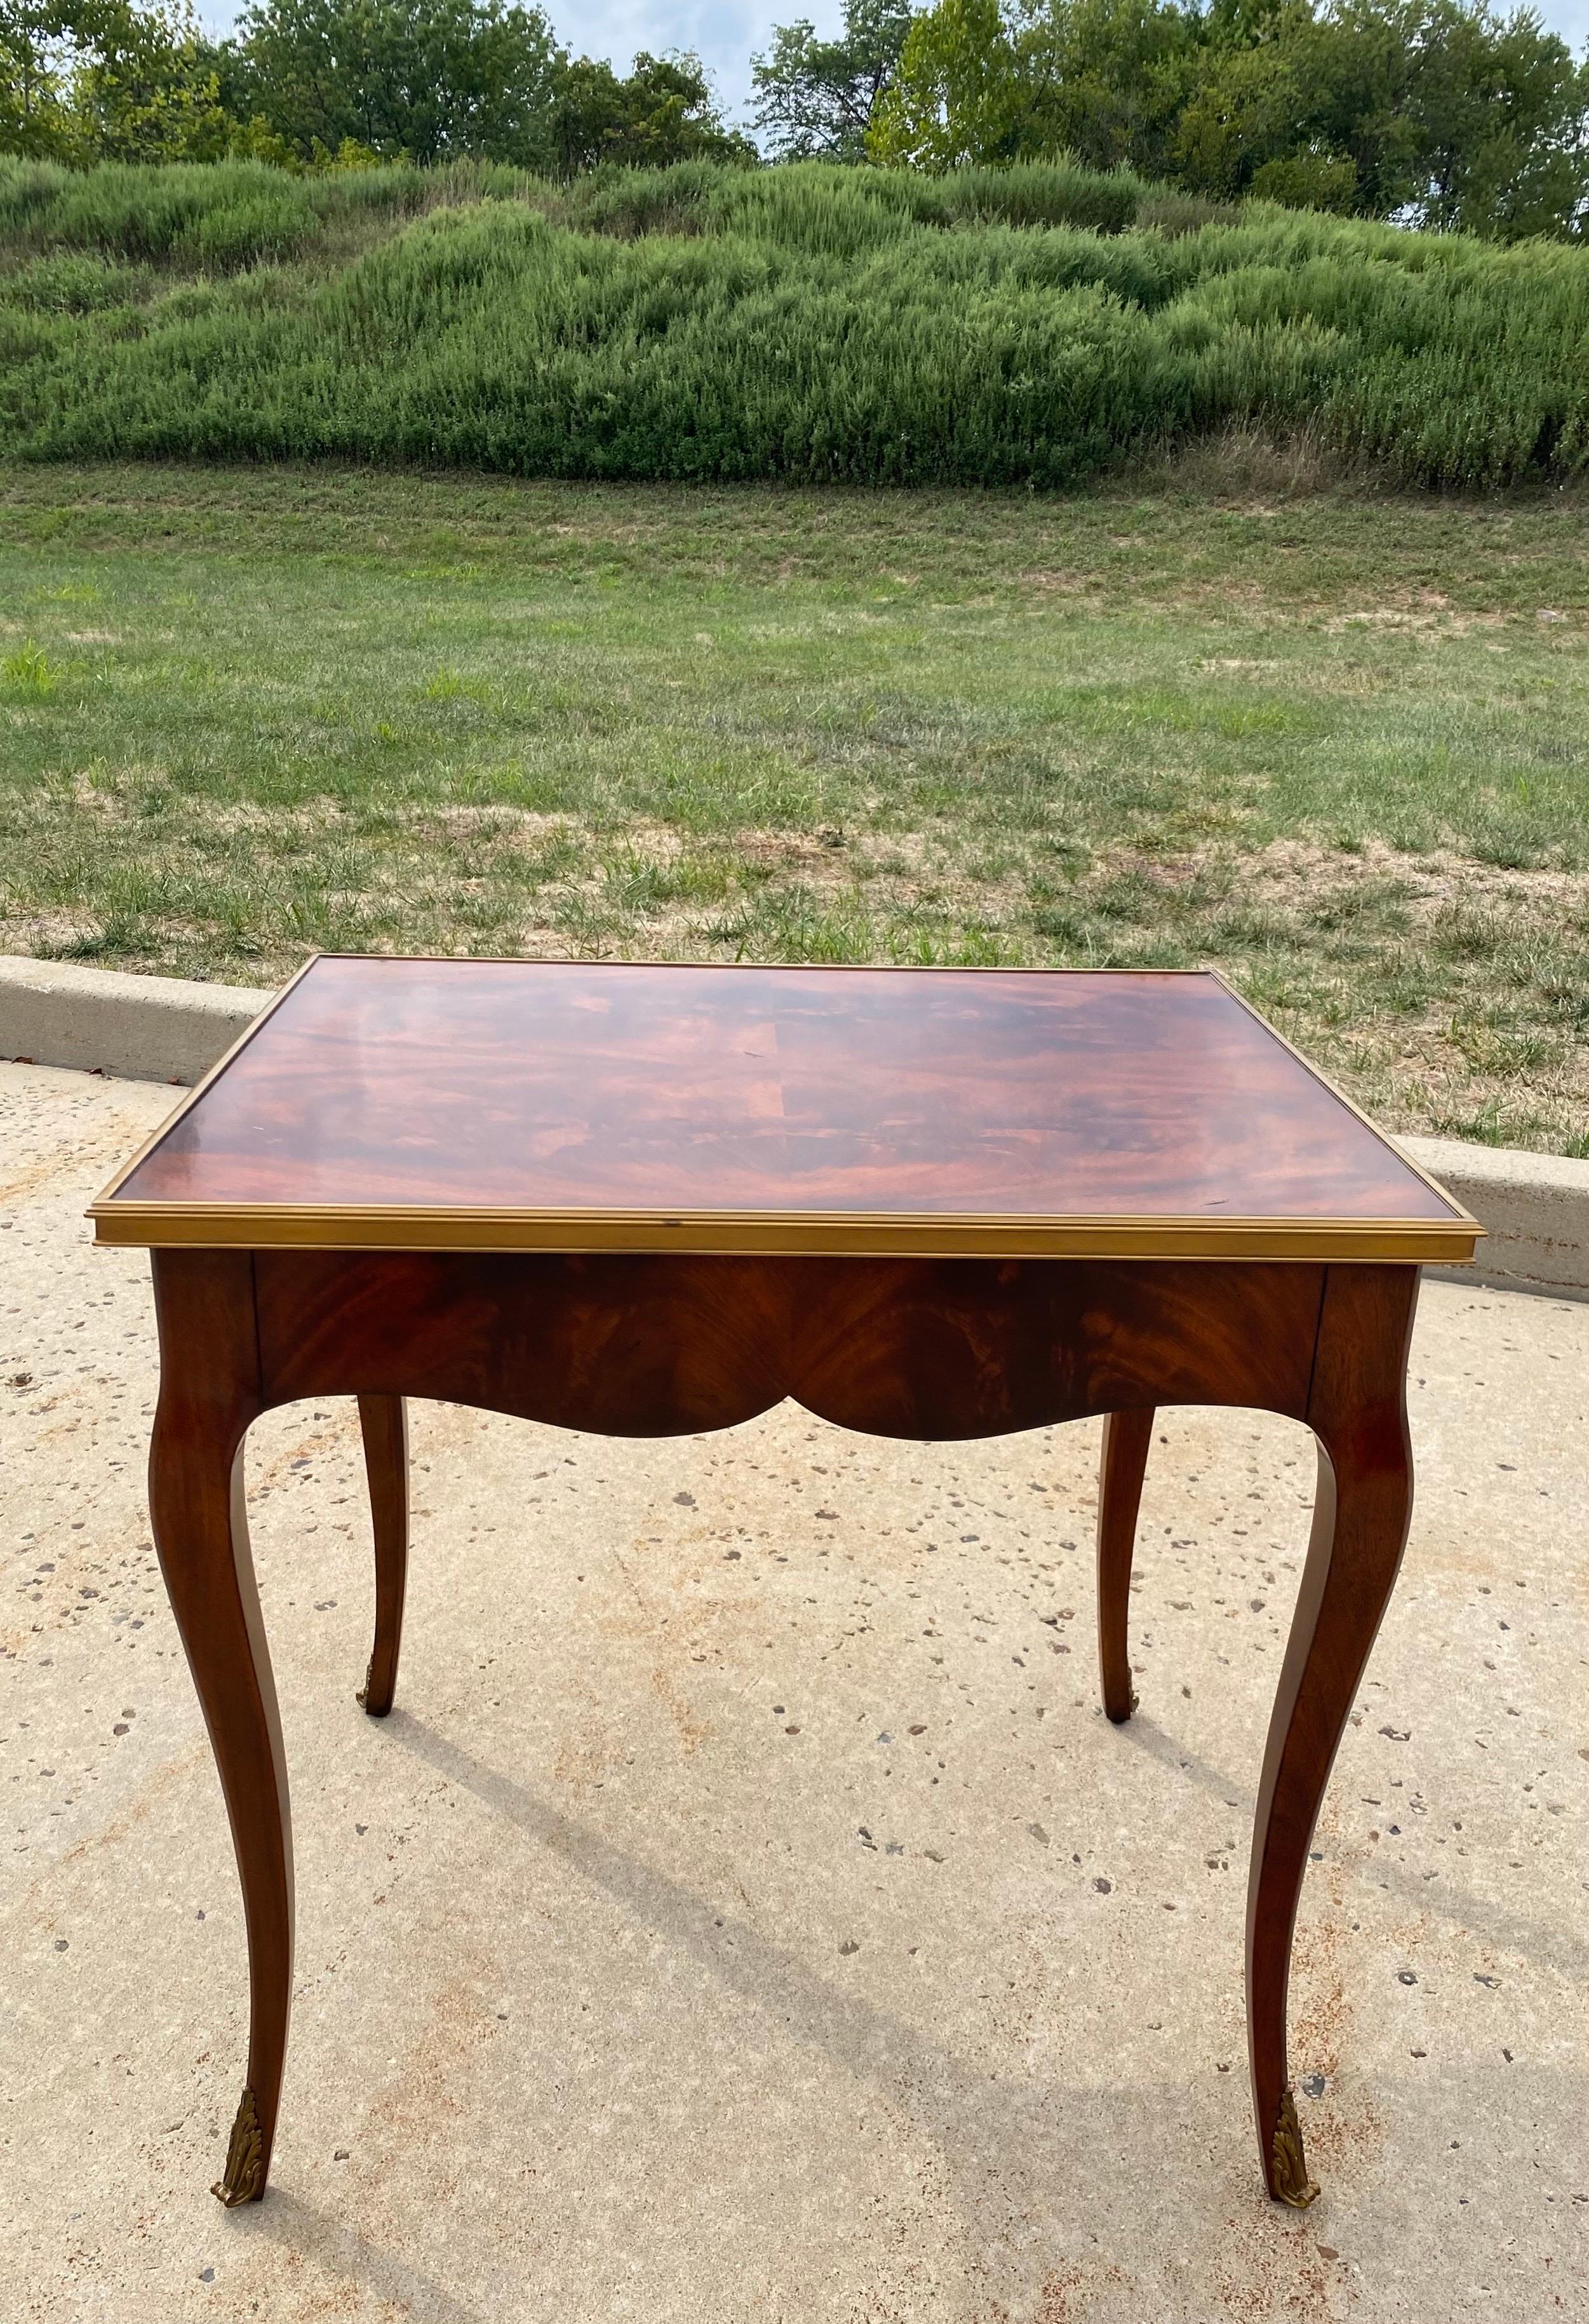 Ralph Lauren home cannes end or bedside table with concealed single drawer. Beautifully patterned Mahogany wood top is trimmed in solid brass. Curved Mahogony wood legs feature decorative brass fittings. This tall rectangular French style table is